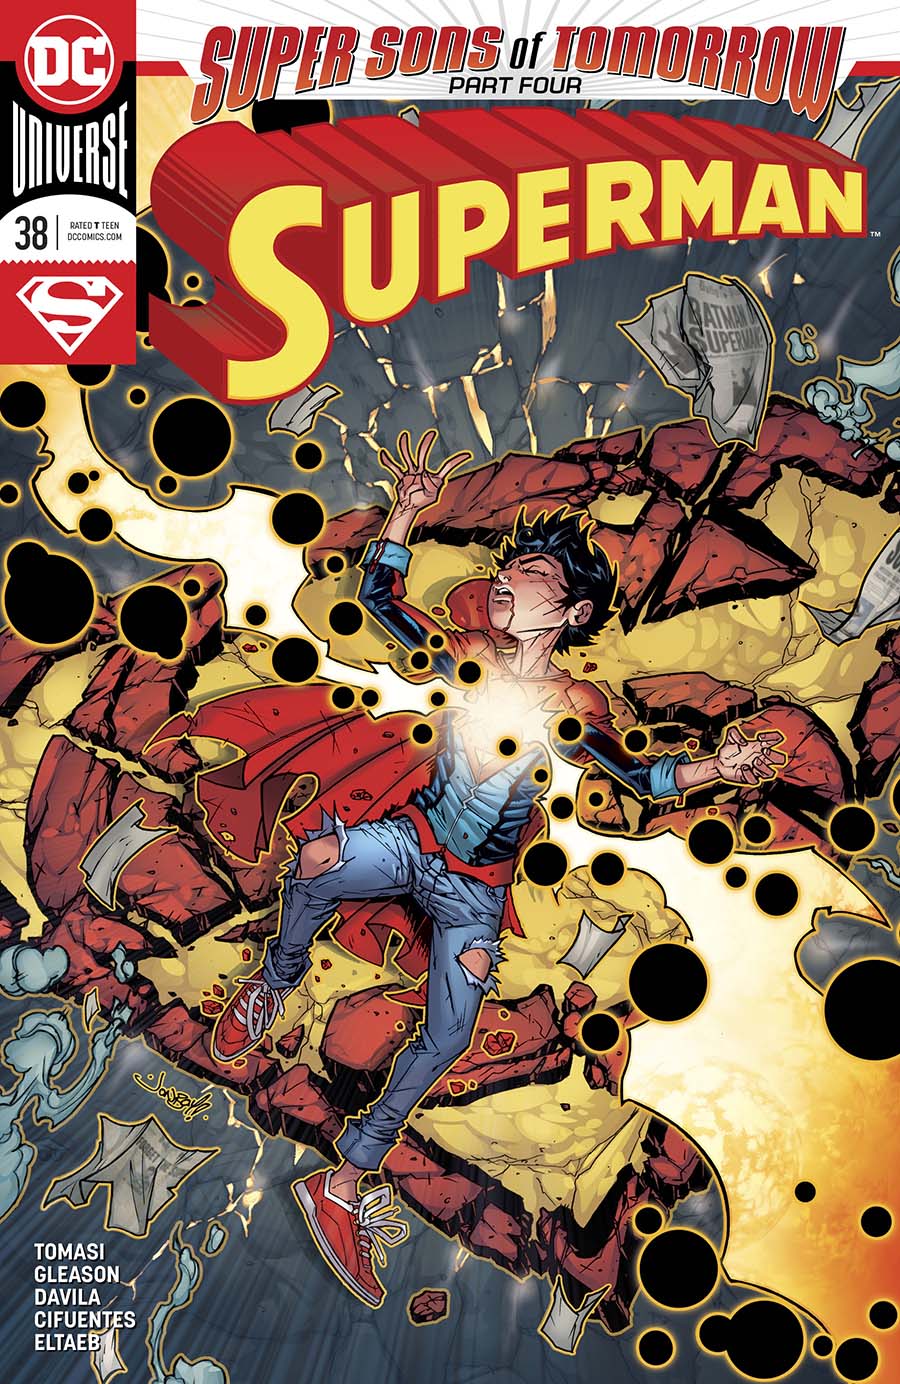 Superman Vol 5 #38 Cover B Variant Jonboy Meyers Cover (Super Sons Of Tomorrow Part 4)